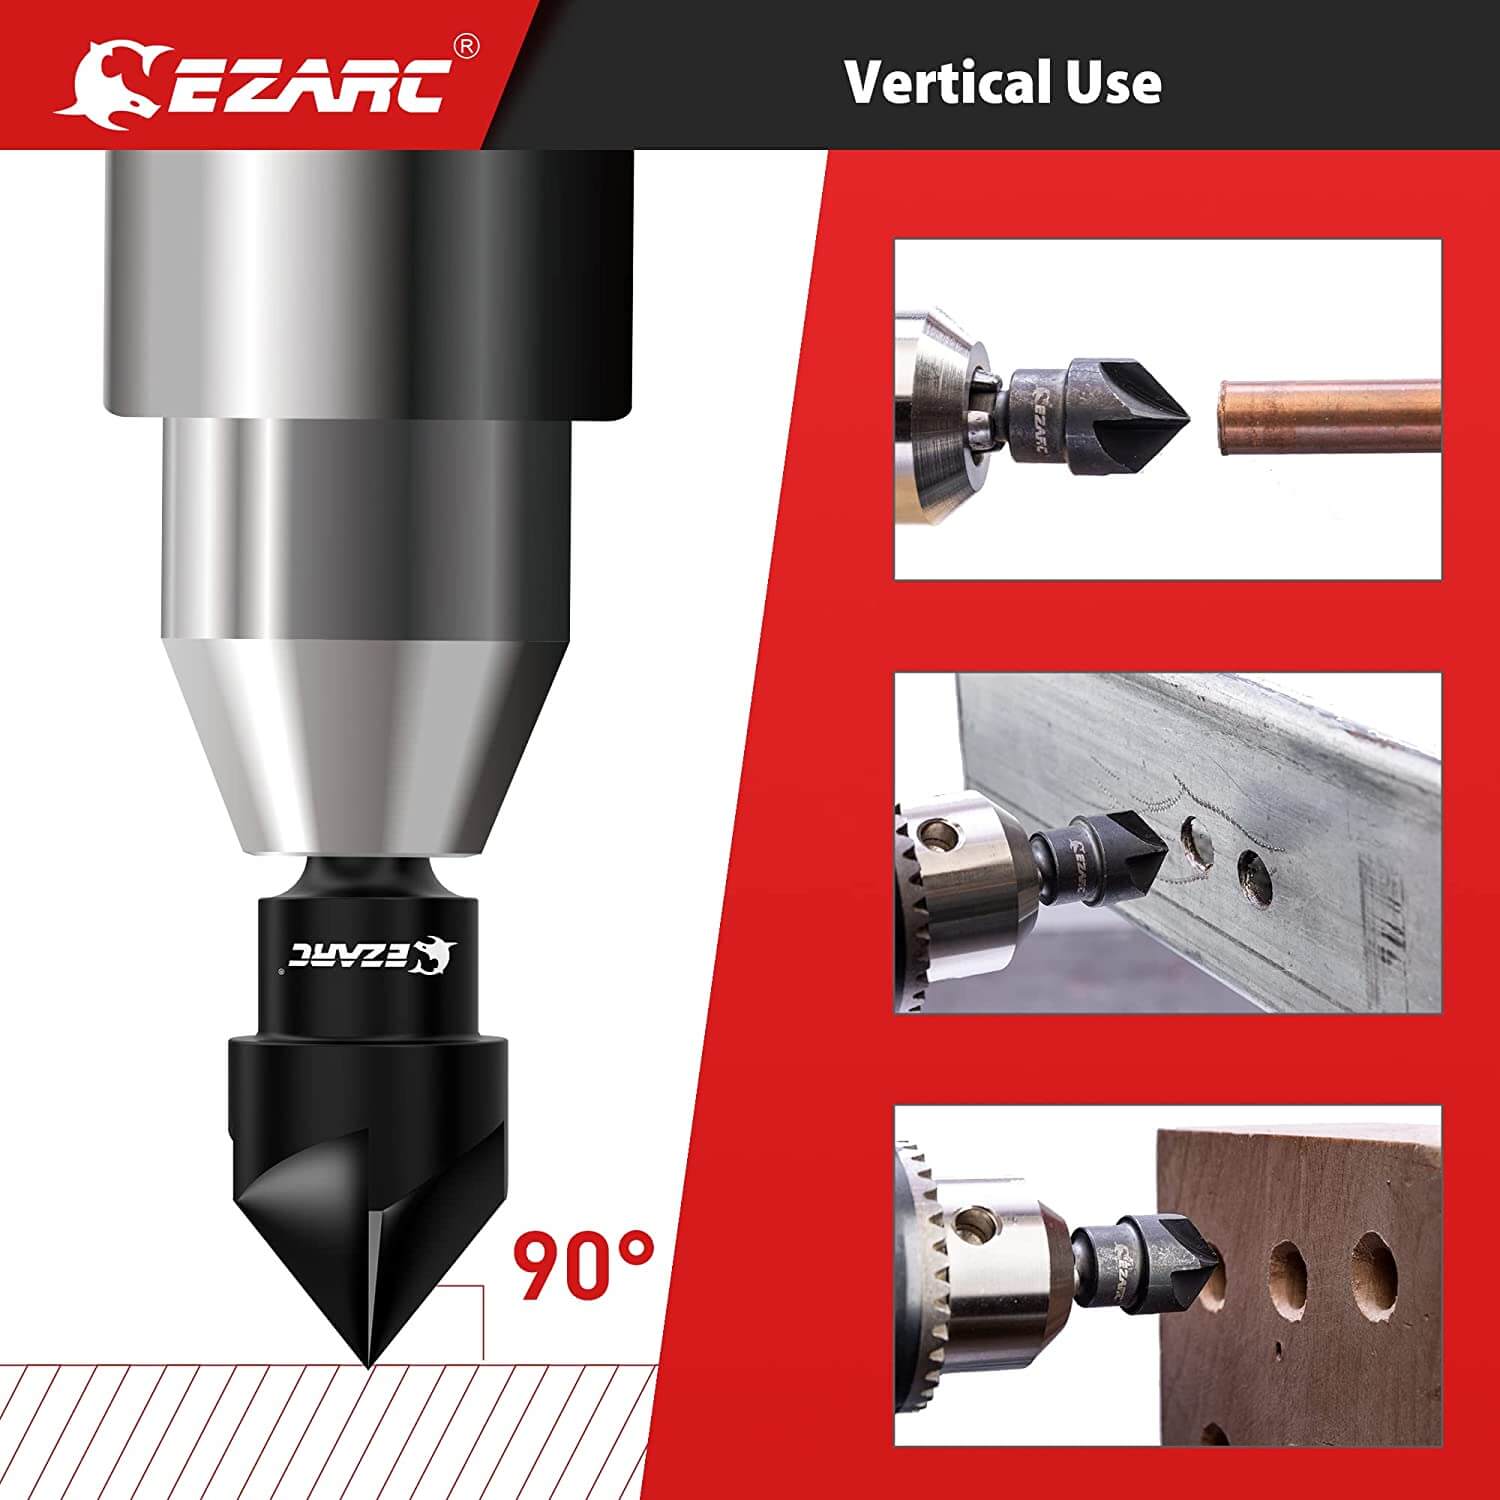 External Rotary Deburring Chamfer & Internal Countersink Chamfer Tool with 1/4" Hex Shank